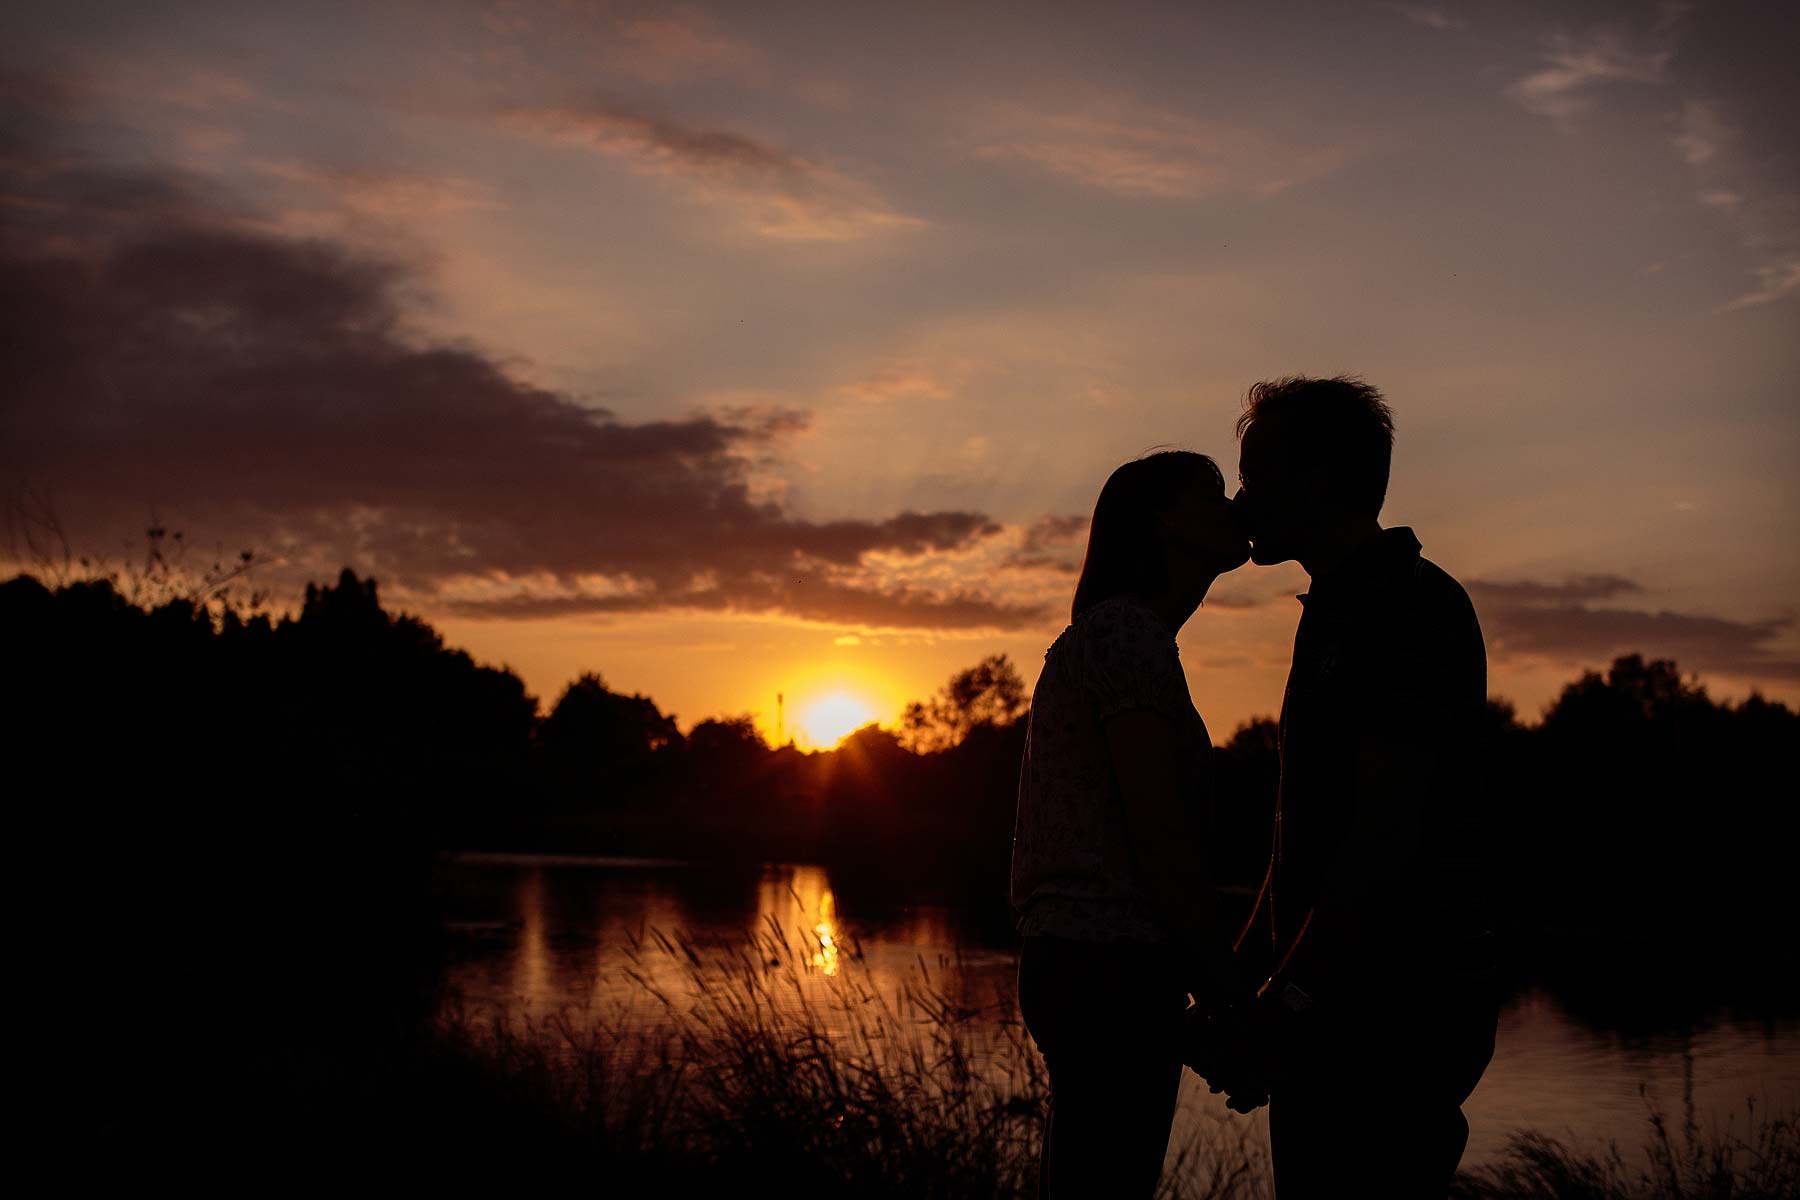 Utilising the setting of Barton Marina in Burton upon Trent for a relaxed evening engagement portrait session with Derbyshire Reportage Wedding Photographer Stuart James